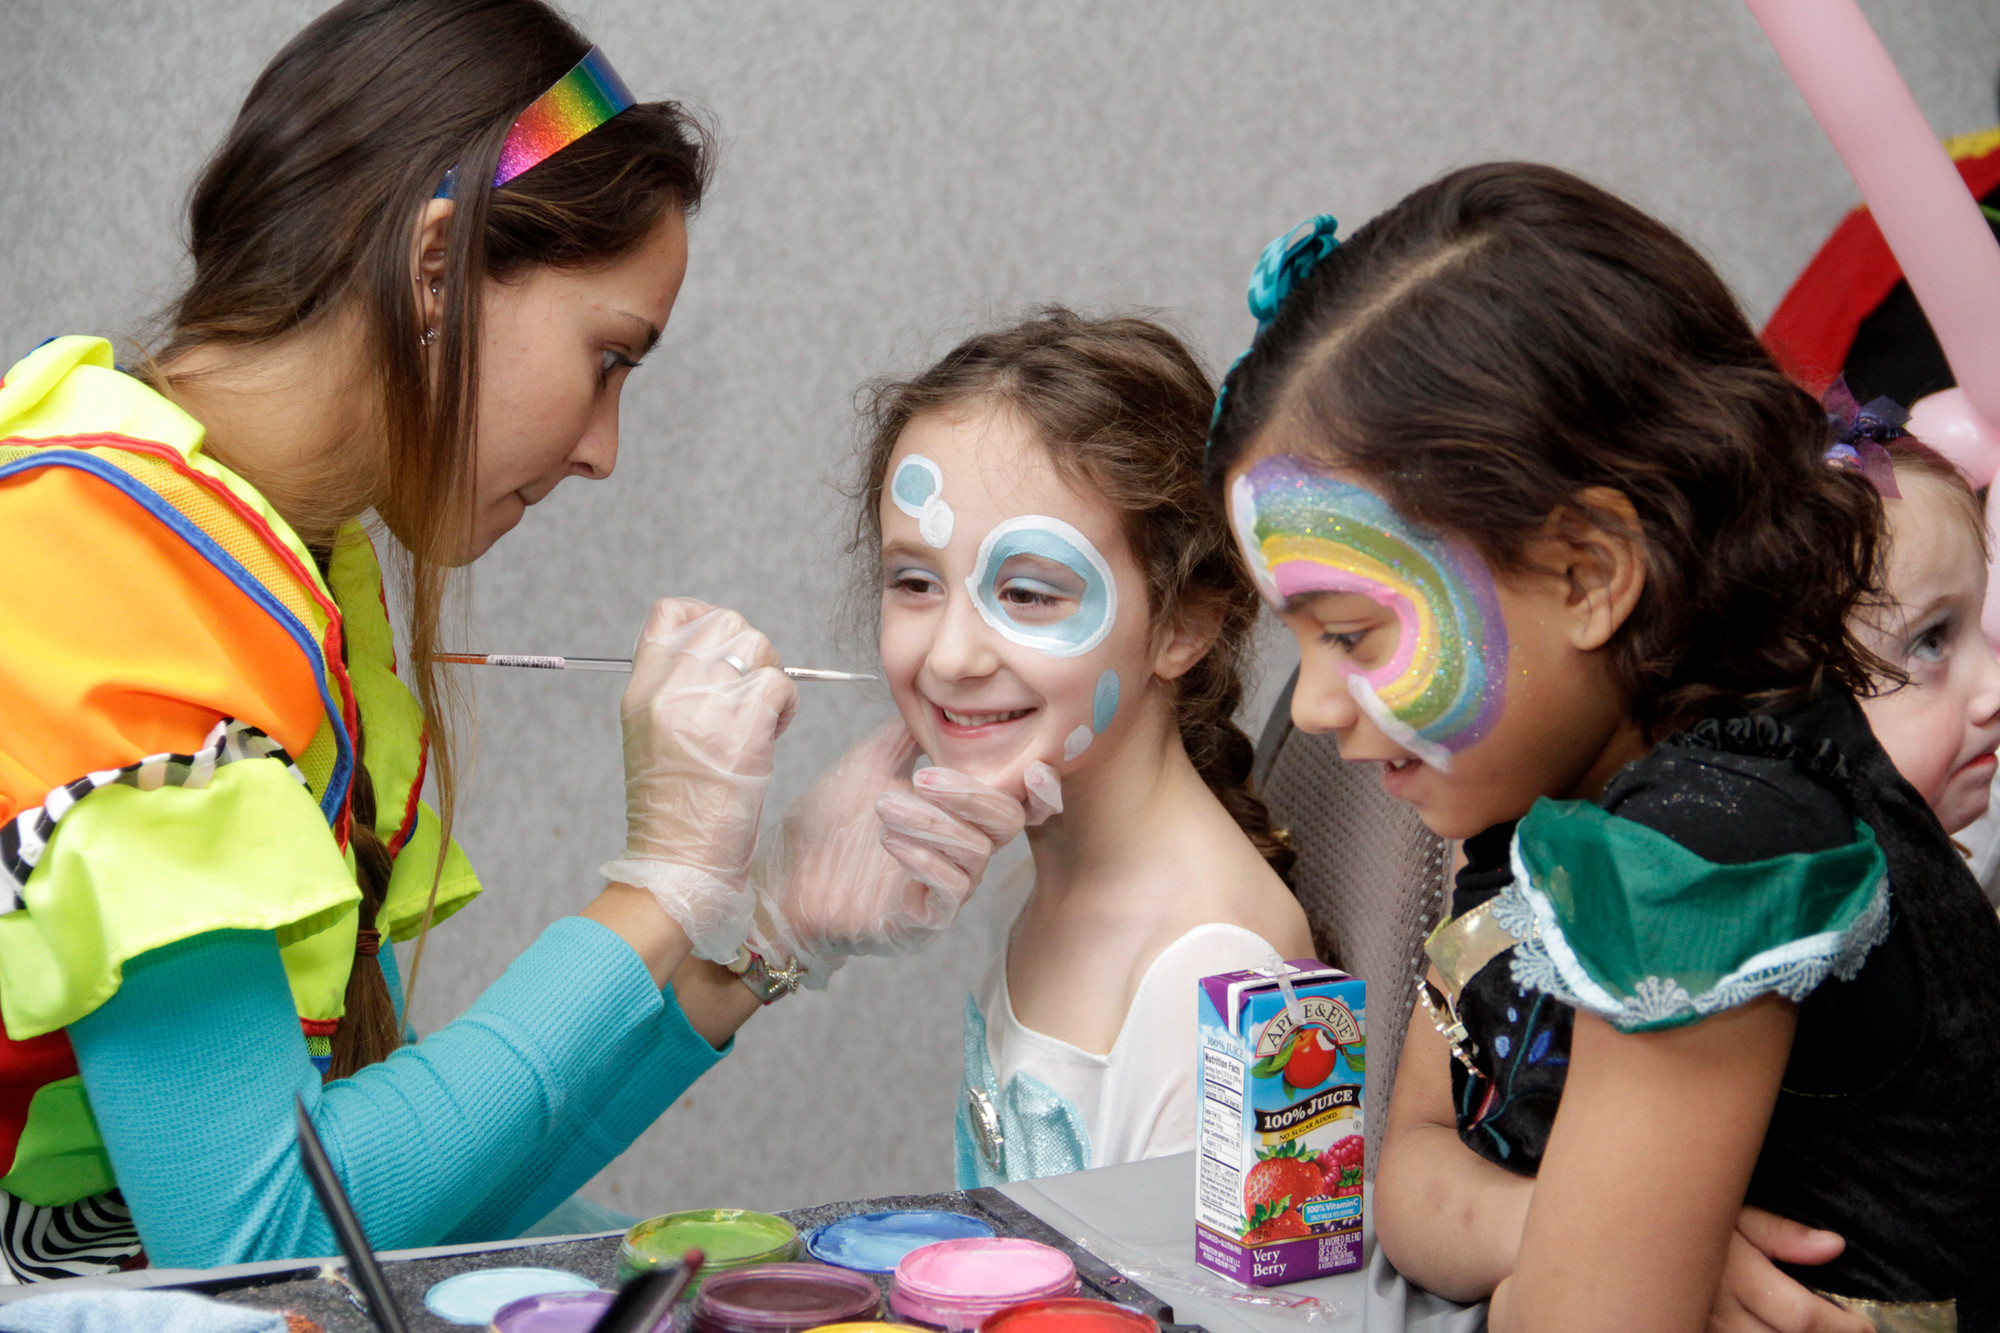 Gianna Farley, center, and Lauren Torres were happy to have their faces painted at the East Meadow Jewish Center’s “Purim Party with a Purpose” event on Sunday.